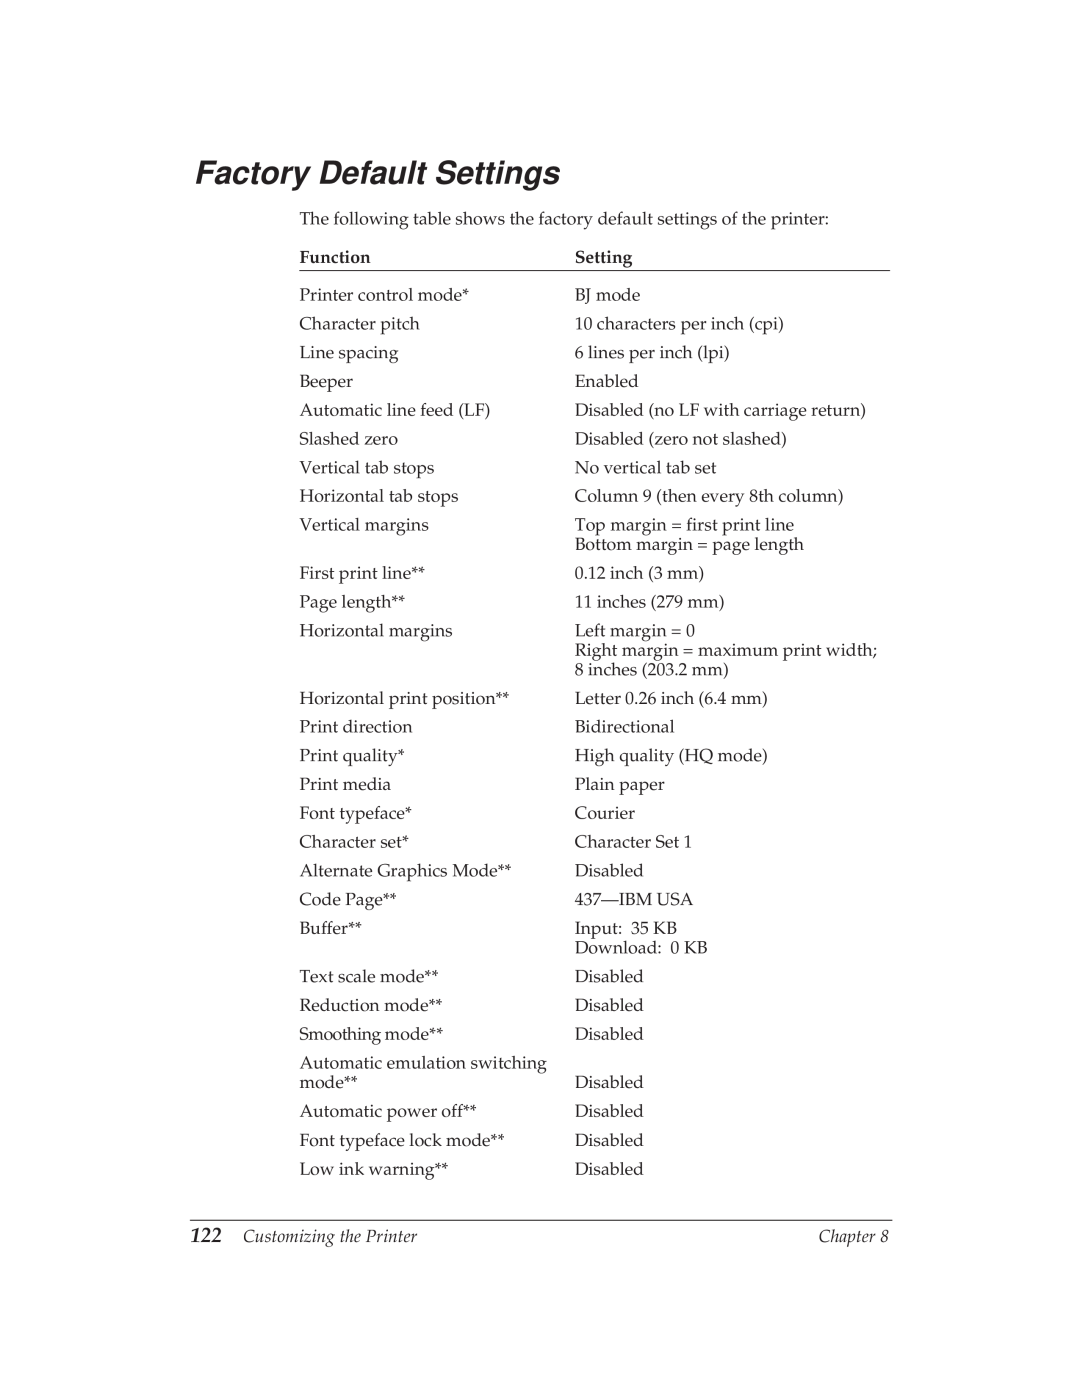 Canon BJ-30 manual Factory Default Settings, Function 